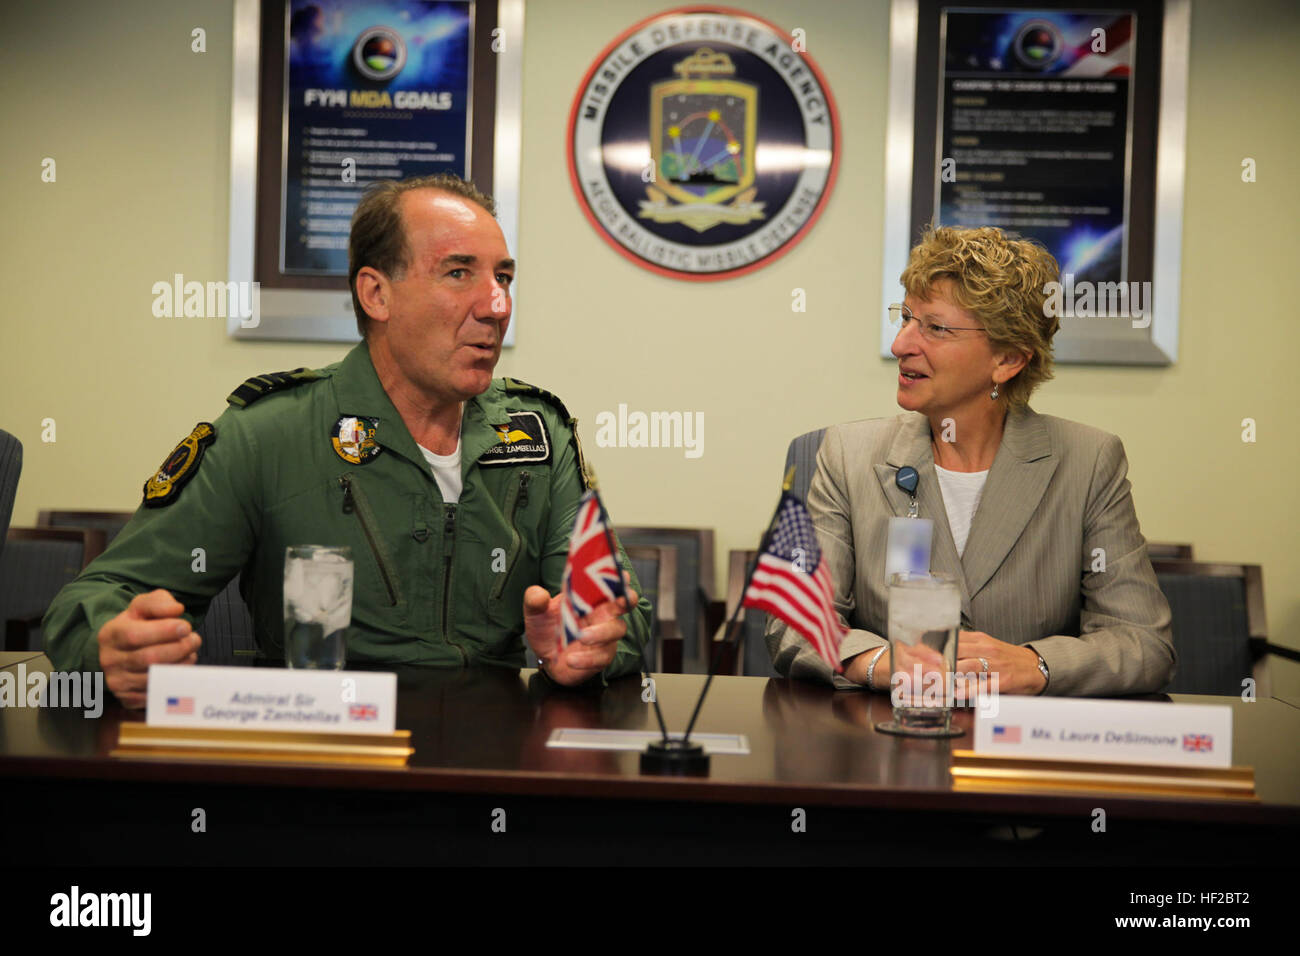 The First Sea Lord and Chief of Naval Staff of the British Royal Navy, Adm. Sir George Zambellas, left, attends a brief alongside Laura DeSimone at the Missile Defense Agency at Dahlgren, Va., July 29, 2014. Zambellas is taking part in the Commandant of the Marine Corps' Counterpart Program, which invites foreign military leaders to visit the United States and interact with U.S. military leaders. (U.S. Marine Corps photo by Cpl. Michael C. Guinto/Released) First Sea Lord Counterpart Visit 140729-M-LI307-484 Stock Photo